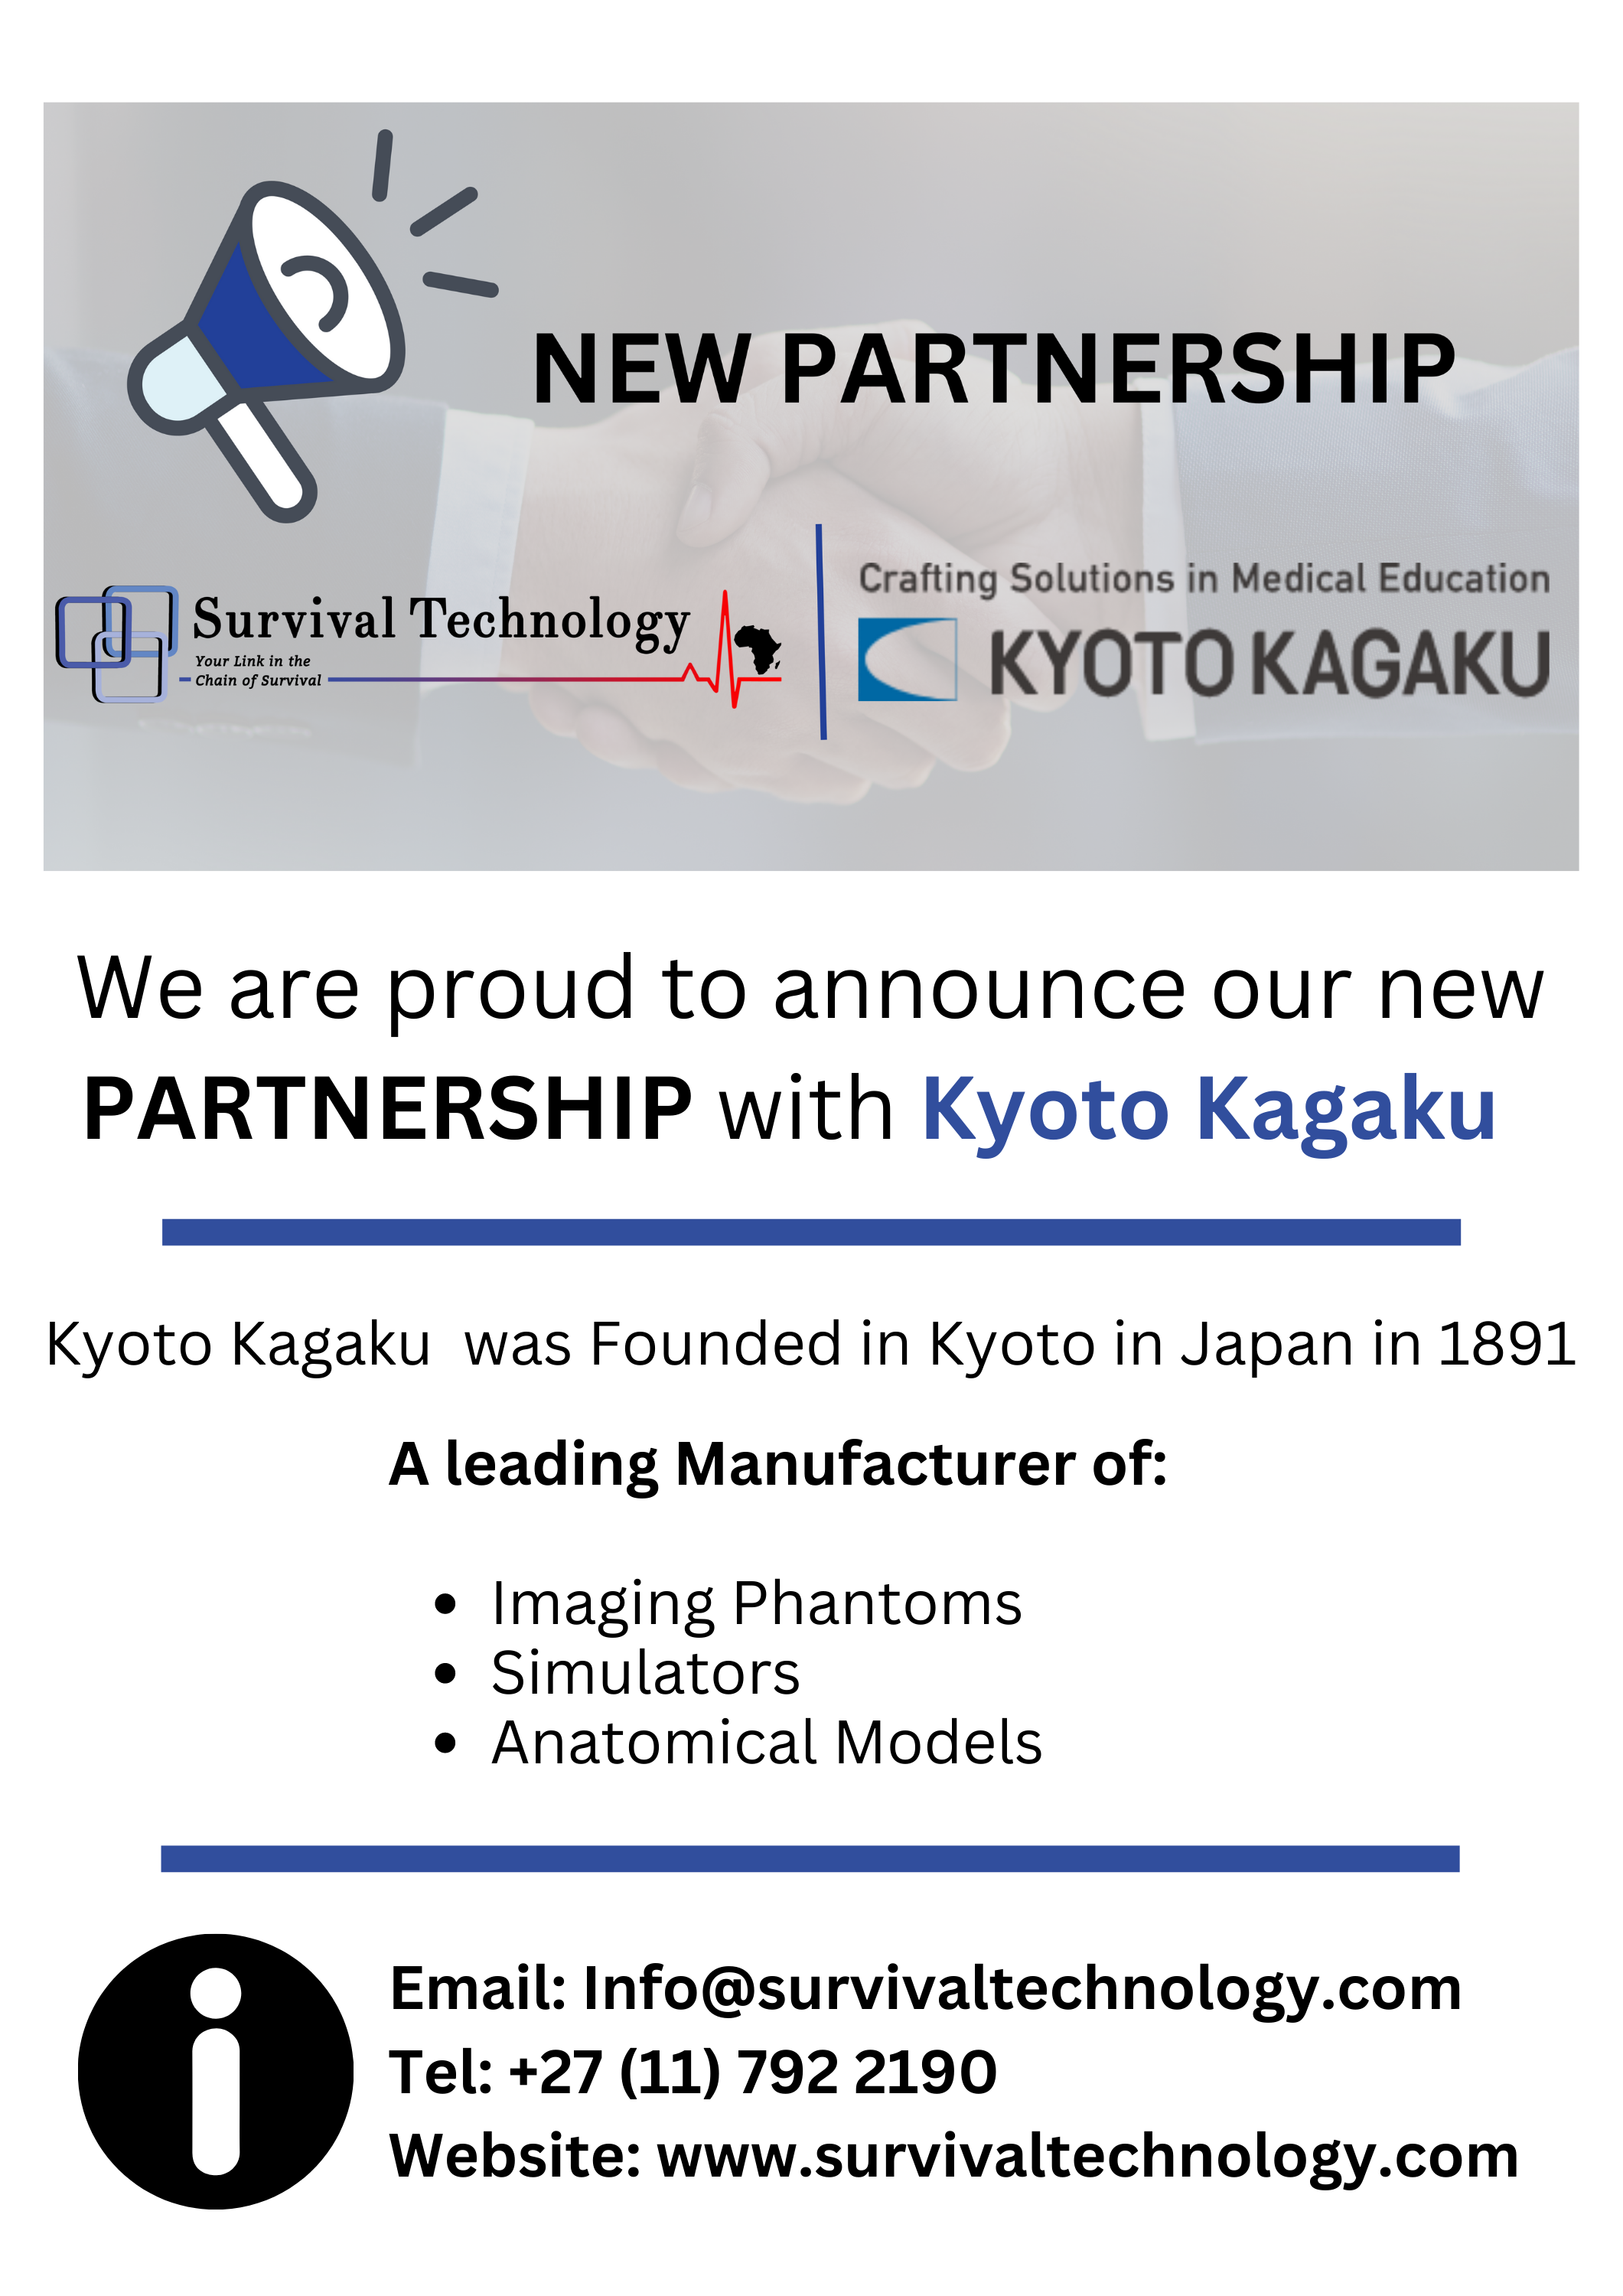 Survival Technology is now in PARTNERSHIP with Kyoto Kagaku (3)